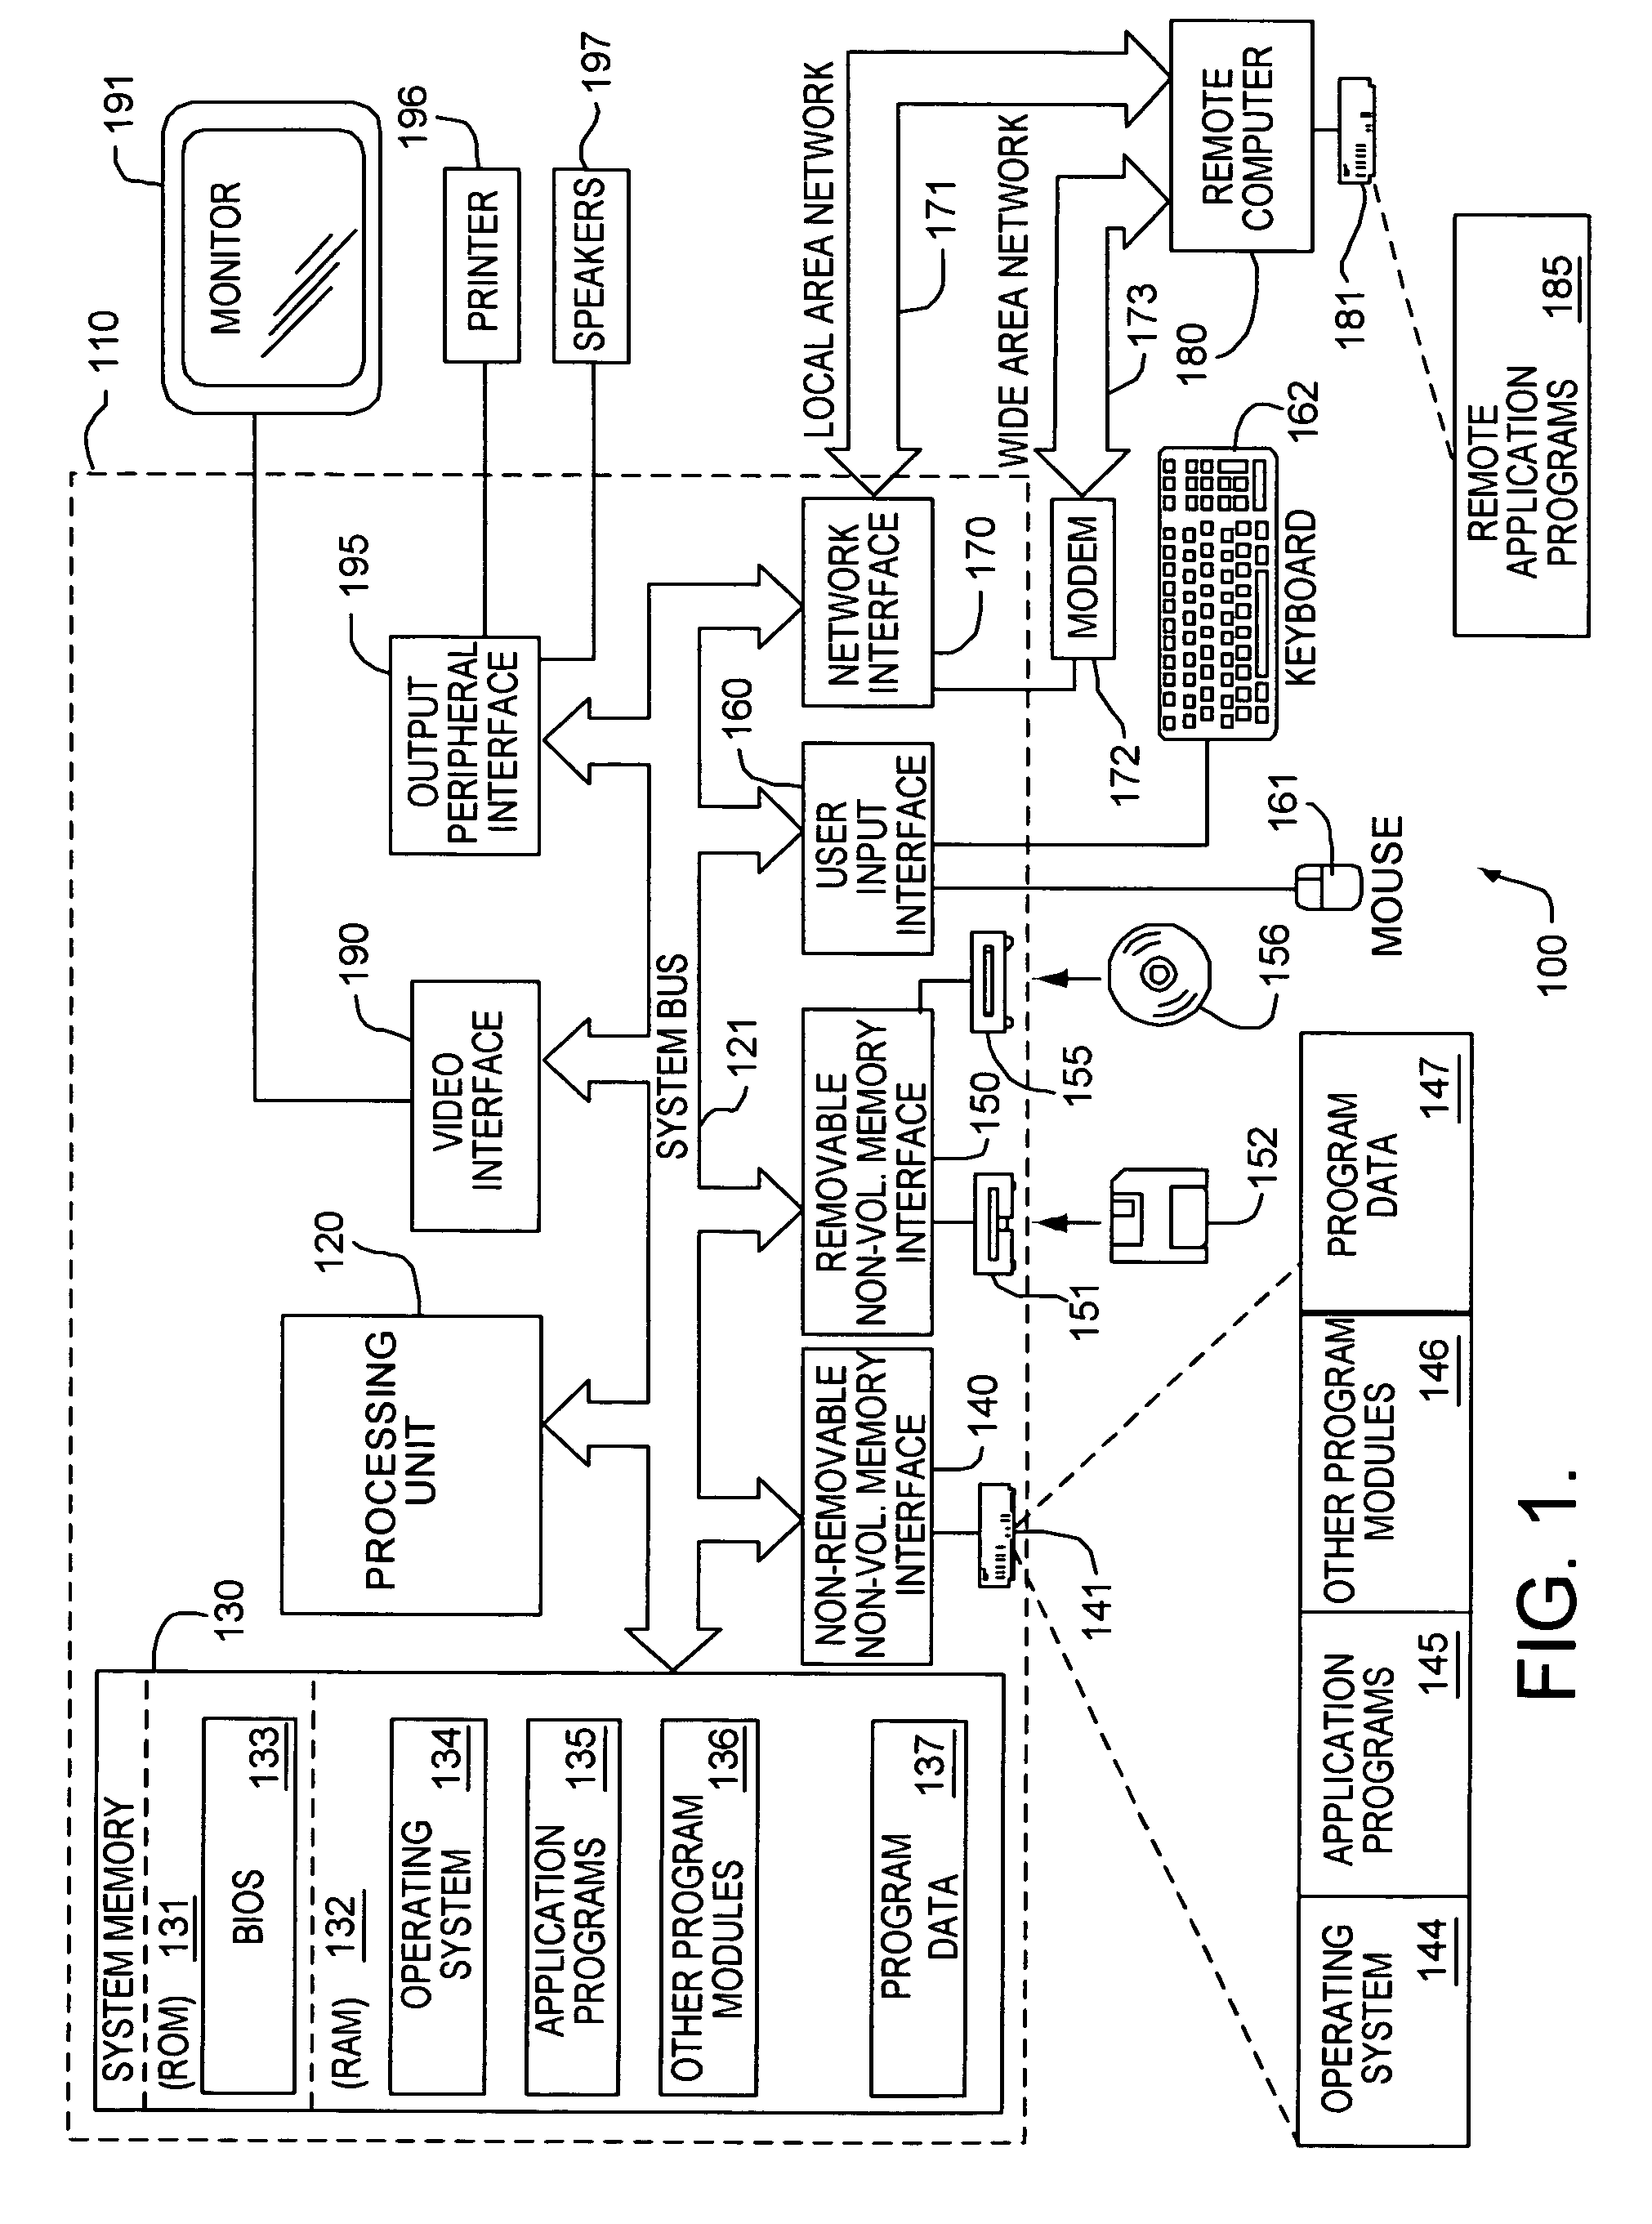 Methods and systems for filtering an Extensible Application Markup Language (XAML) file to facilitate indexing of the logical content contained therein